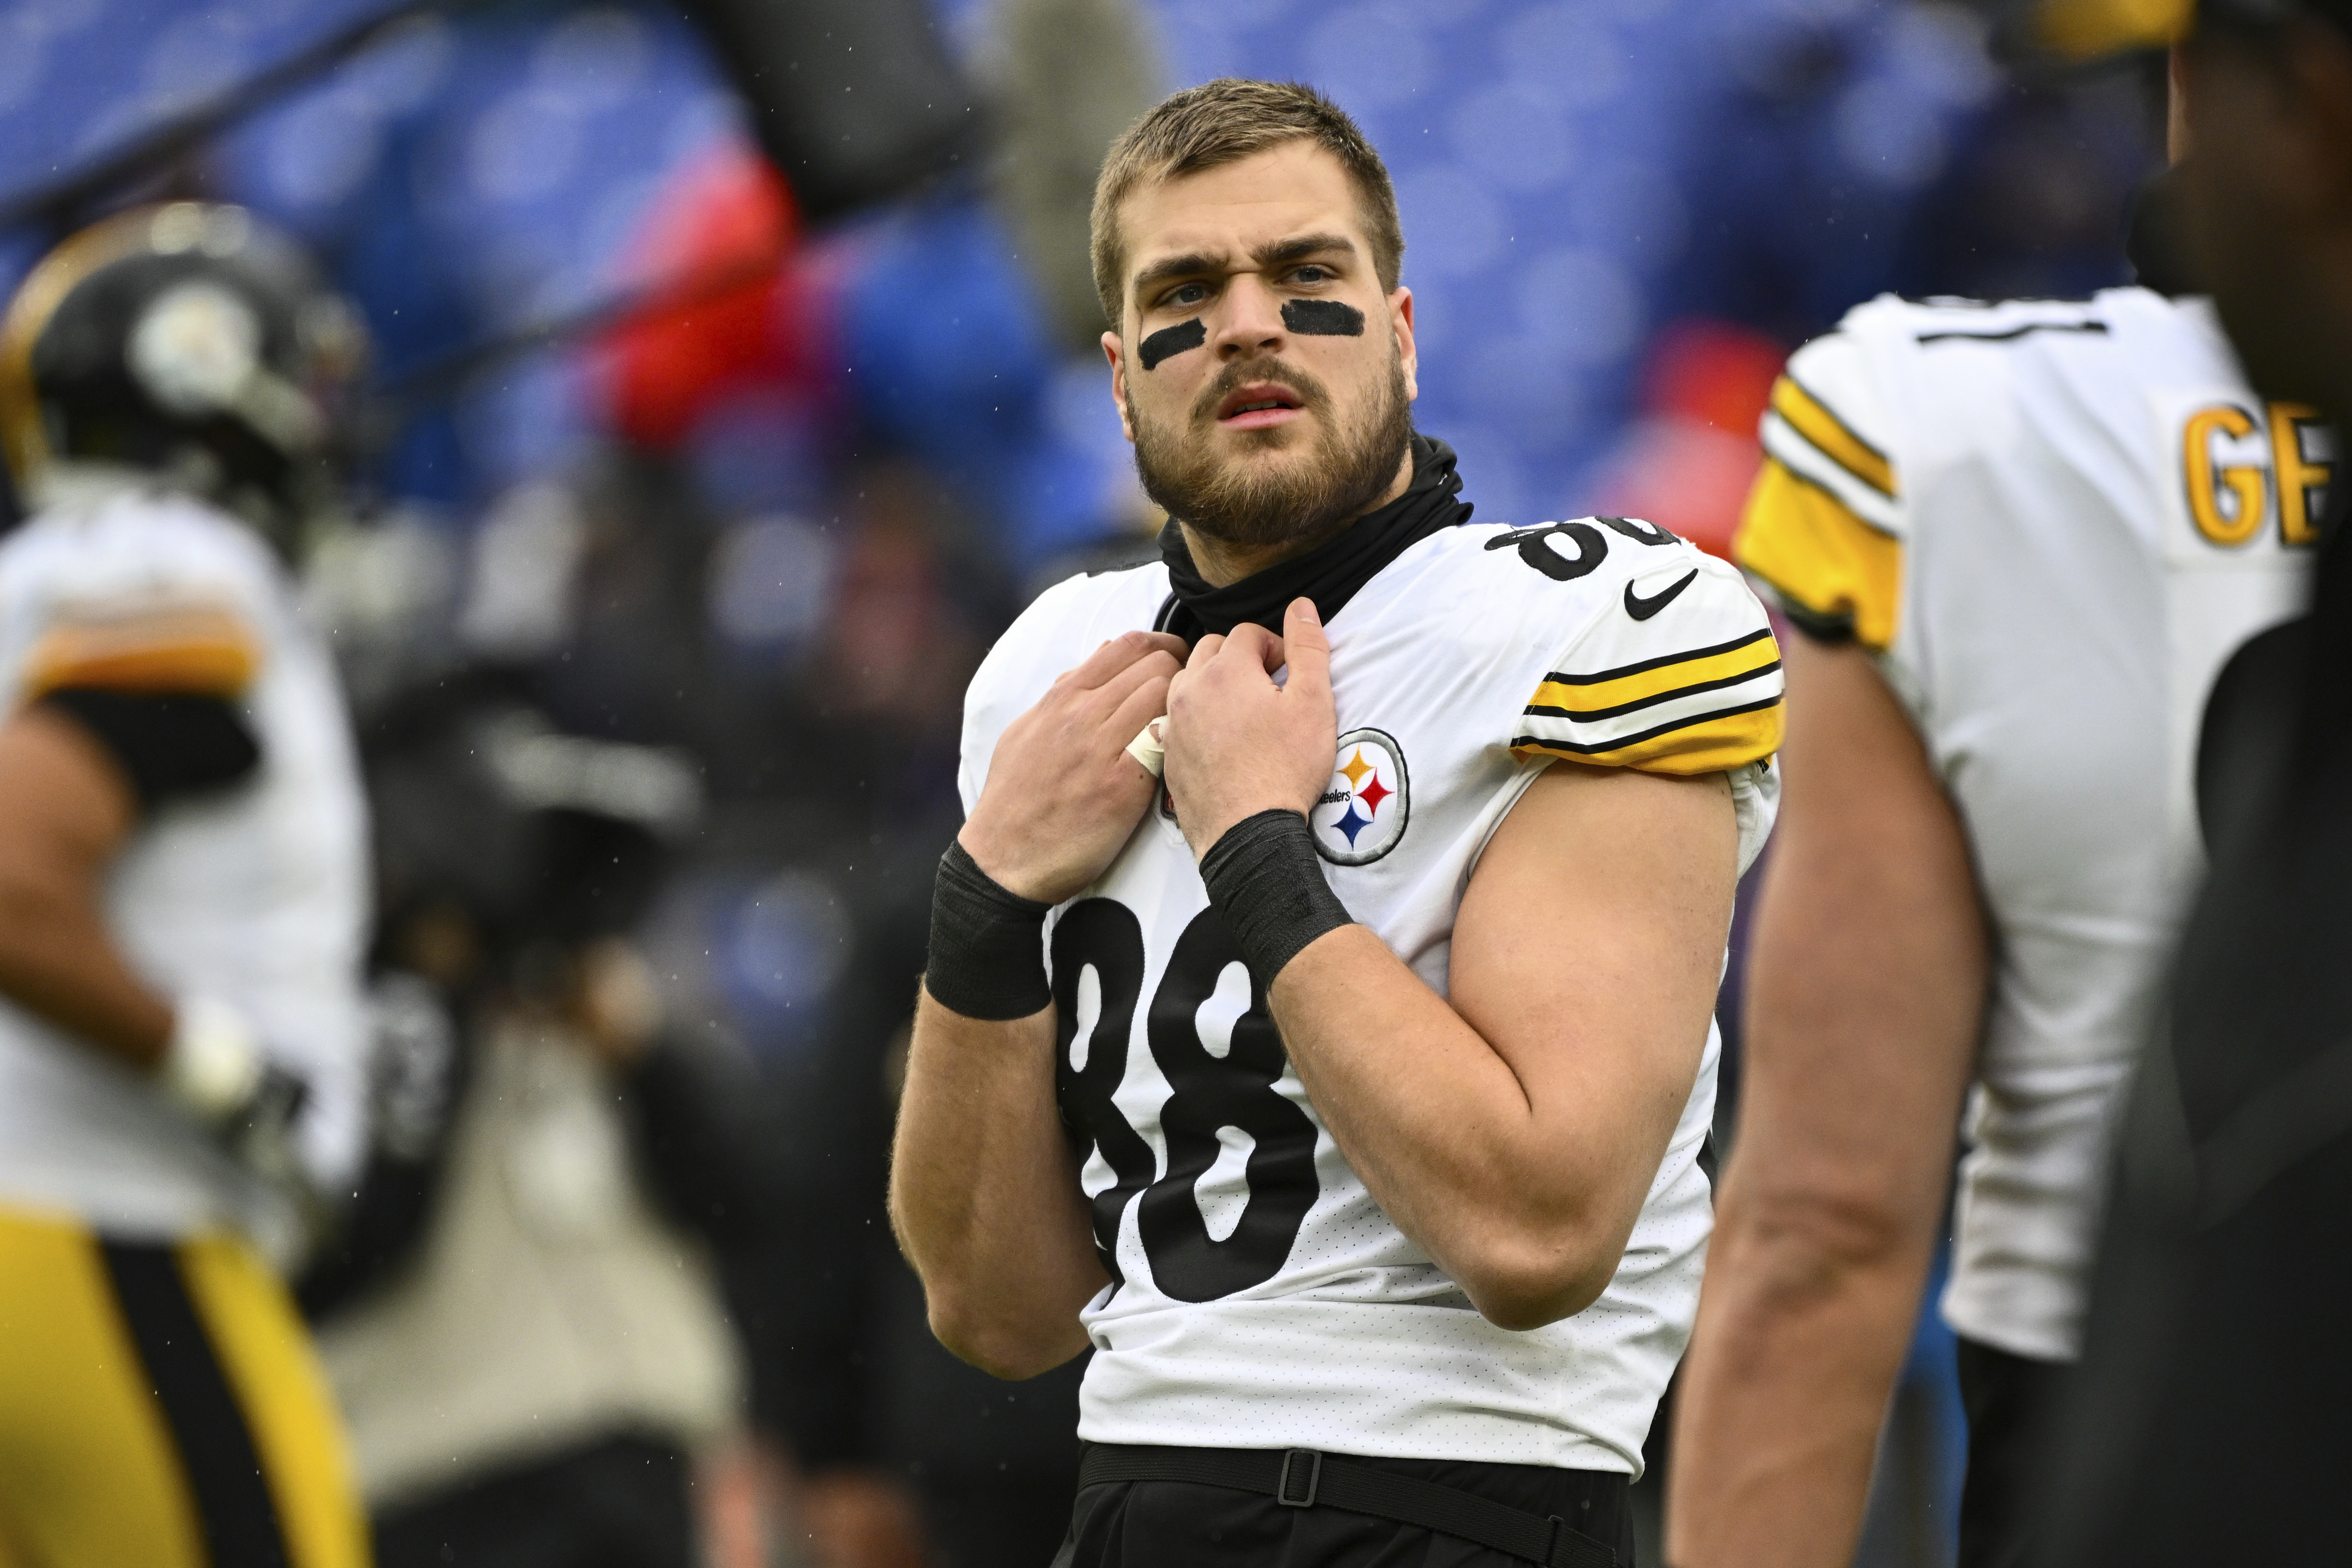 Mass. native and Steelers TE Pat Freiermuth focused on 'taking my game to  the next level' following standout rookie year in Pittsburgh 